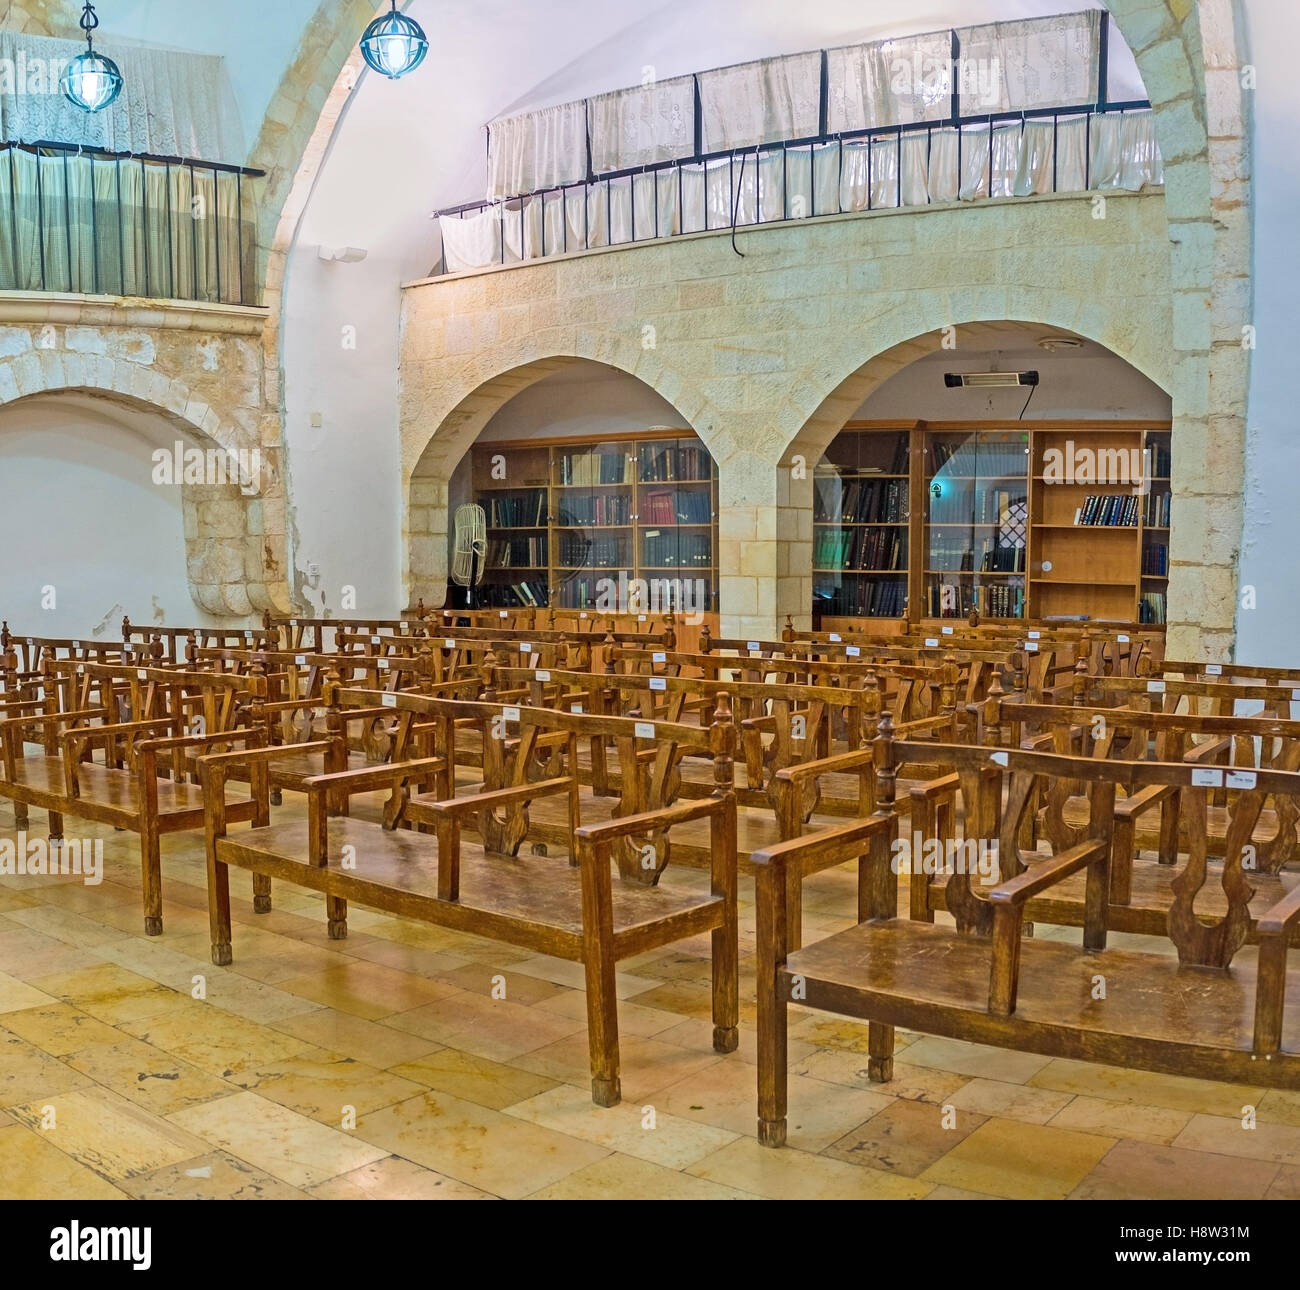 The interior of Eliyahu Hanavi synagogue with the book shelves on the background Stock Photo